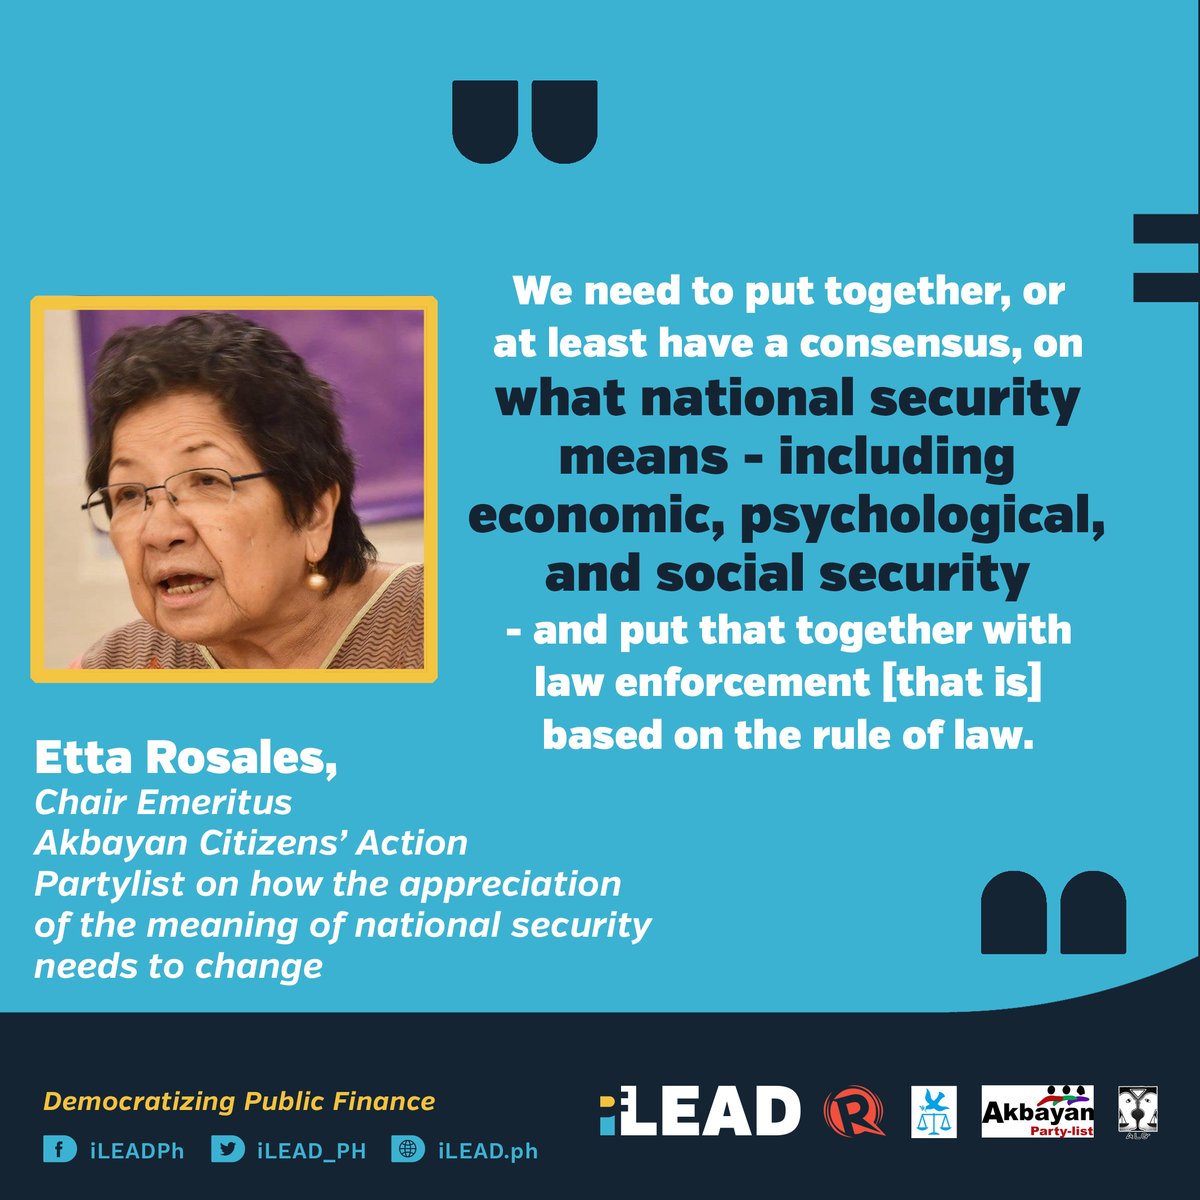 Etta Rosales, Chair Emeritus,  @AkbayanParty says that the government's definition of "national security" needs to be revisited to include considerations of economic, psychological, and social security. These should then be factored in policies.